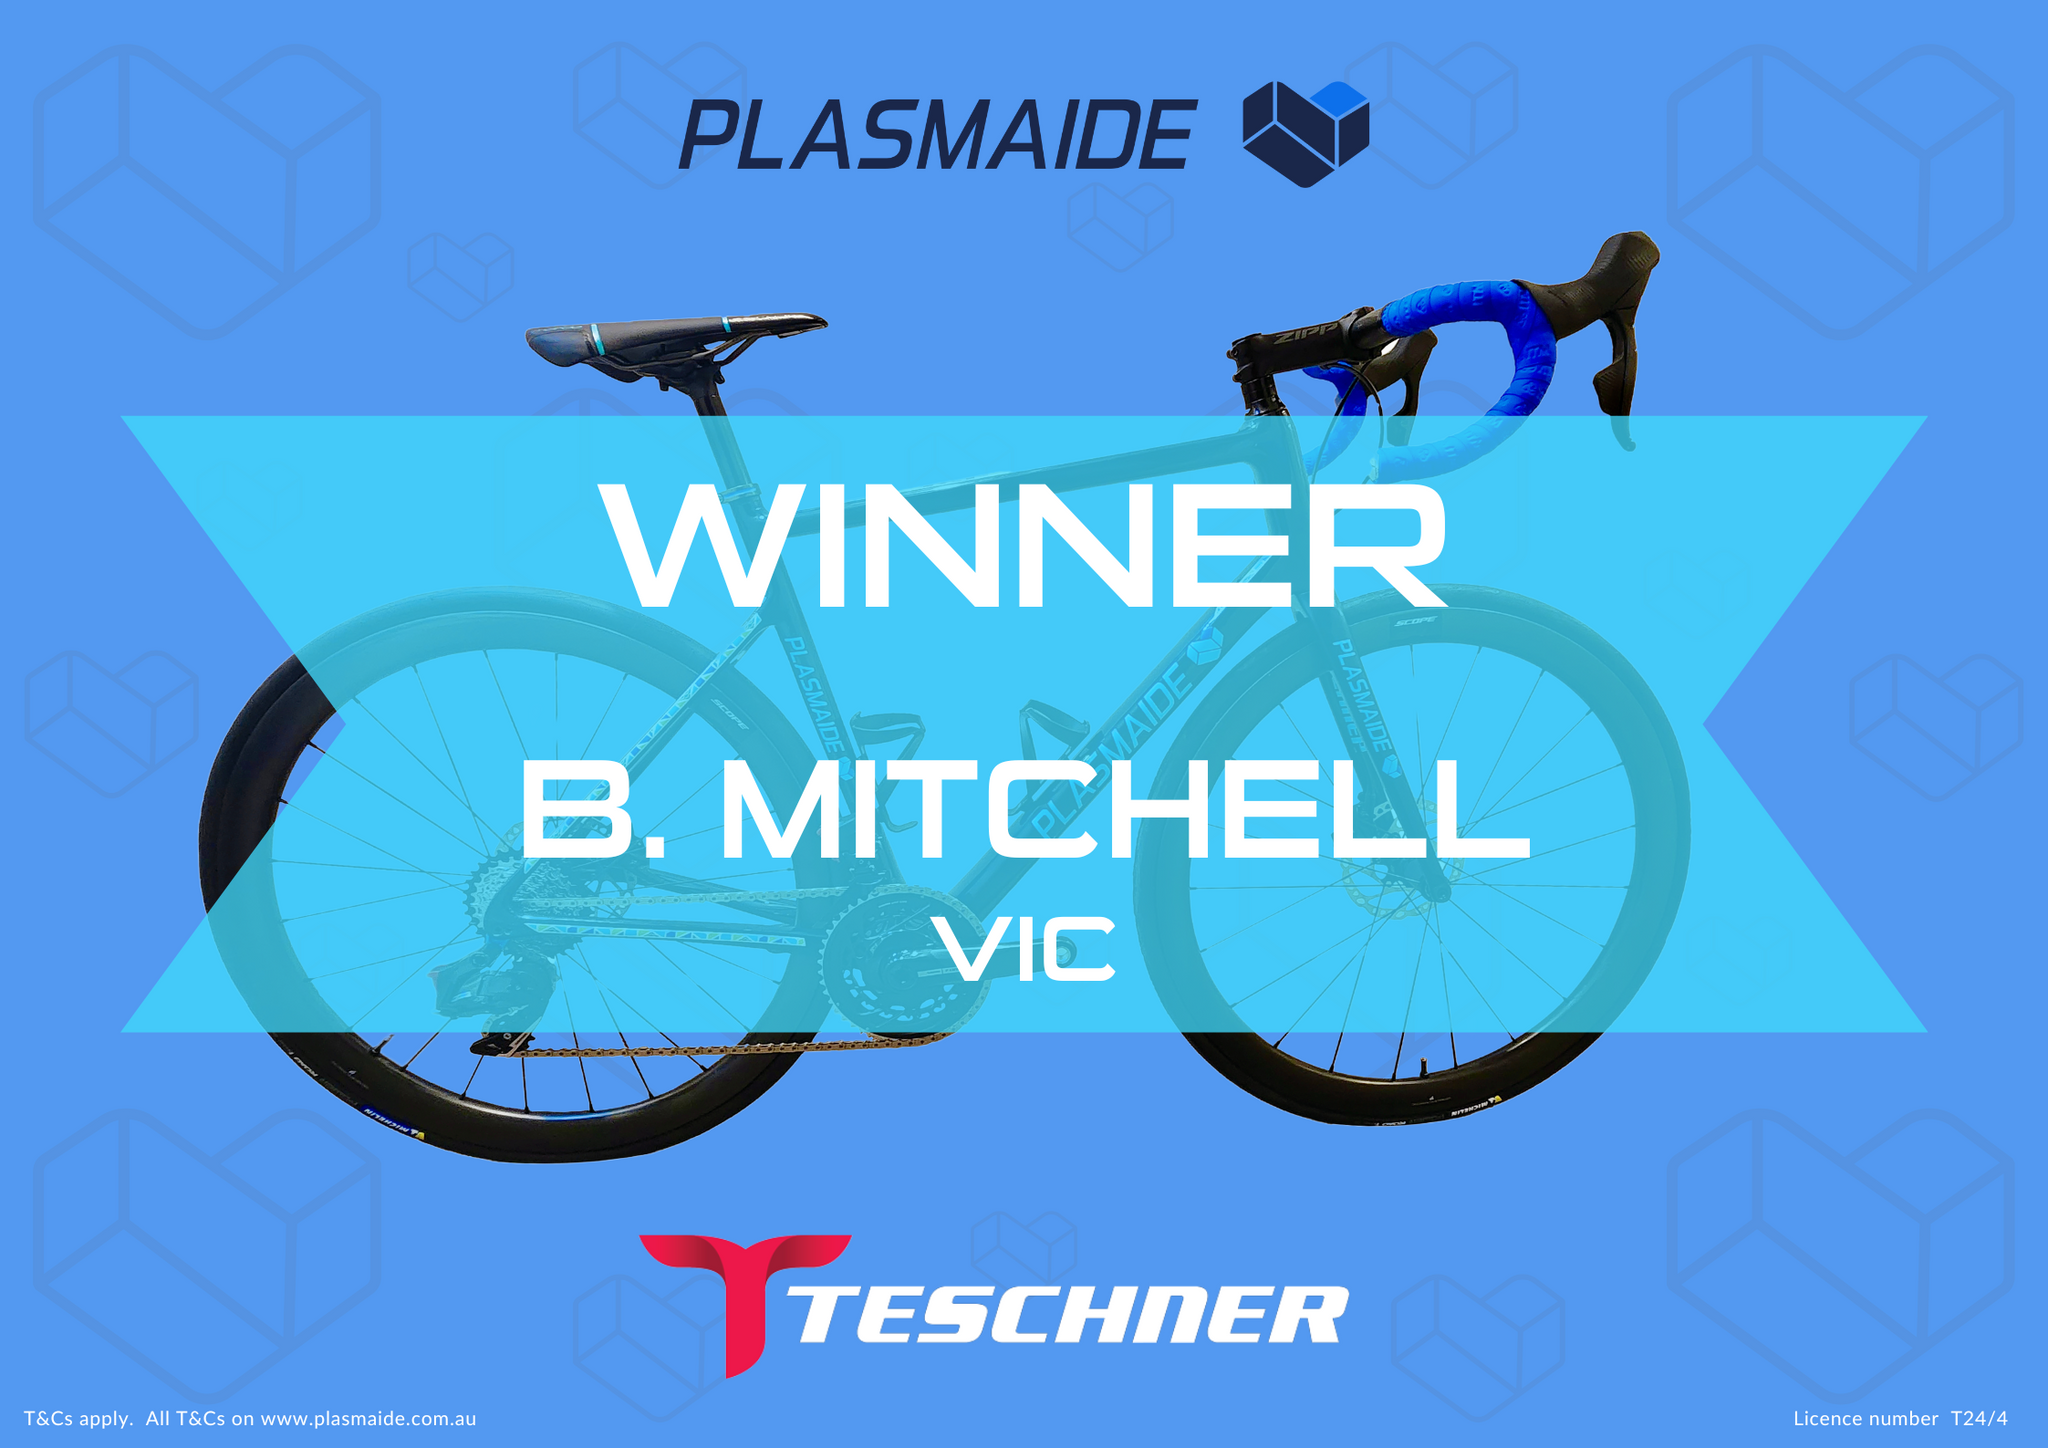 Win a One-of-a-Kind PLASMAIDE x TESCHNER Road Bike